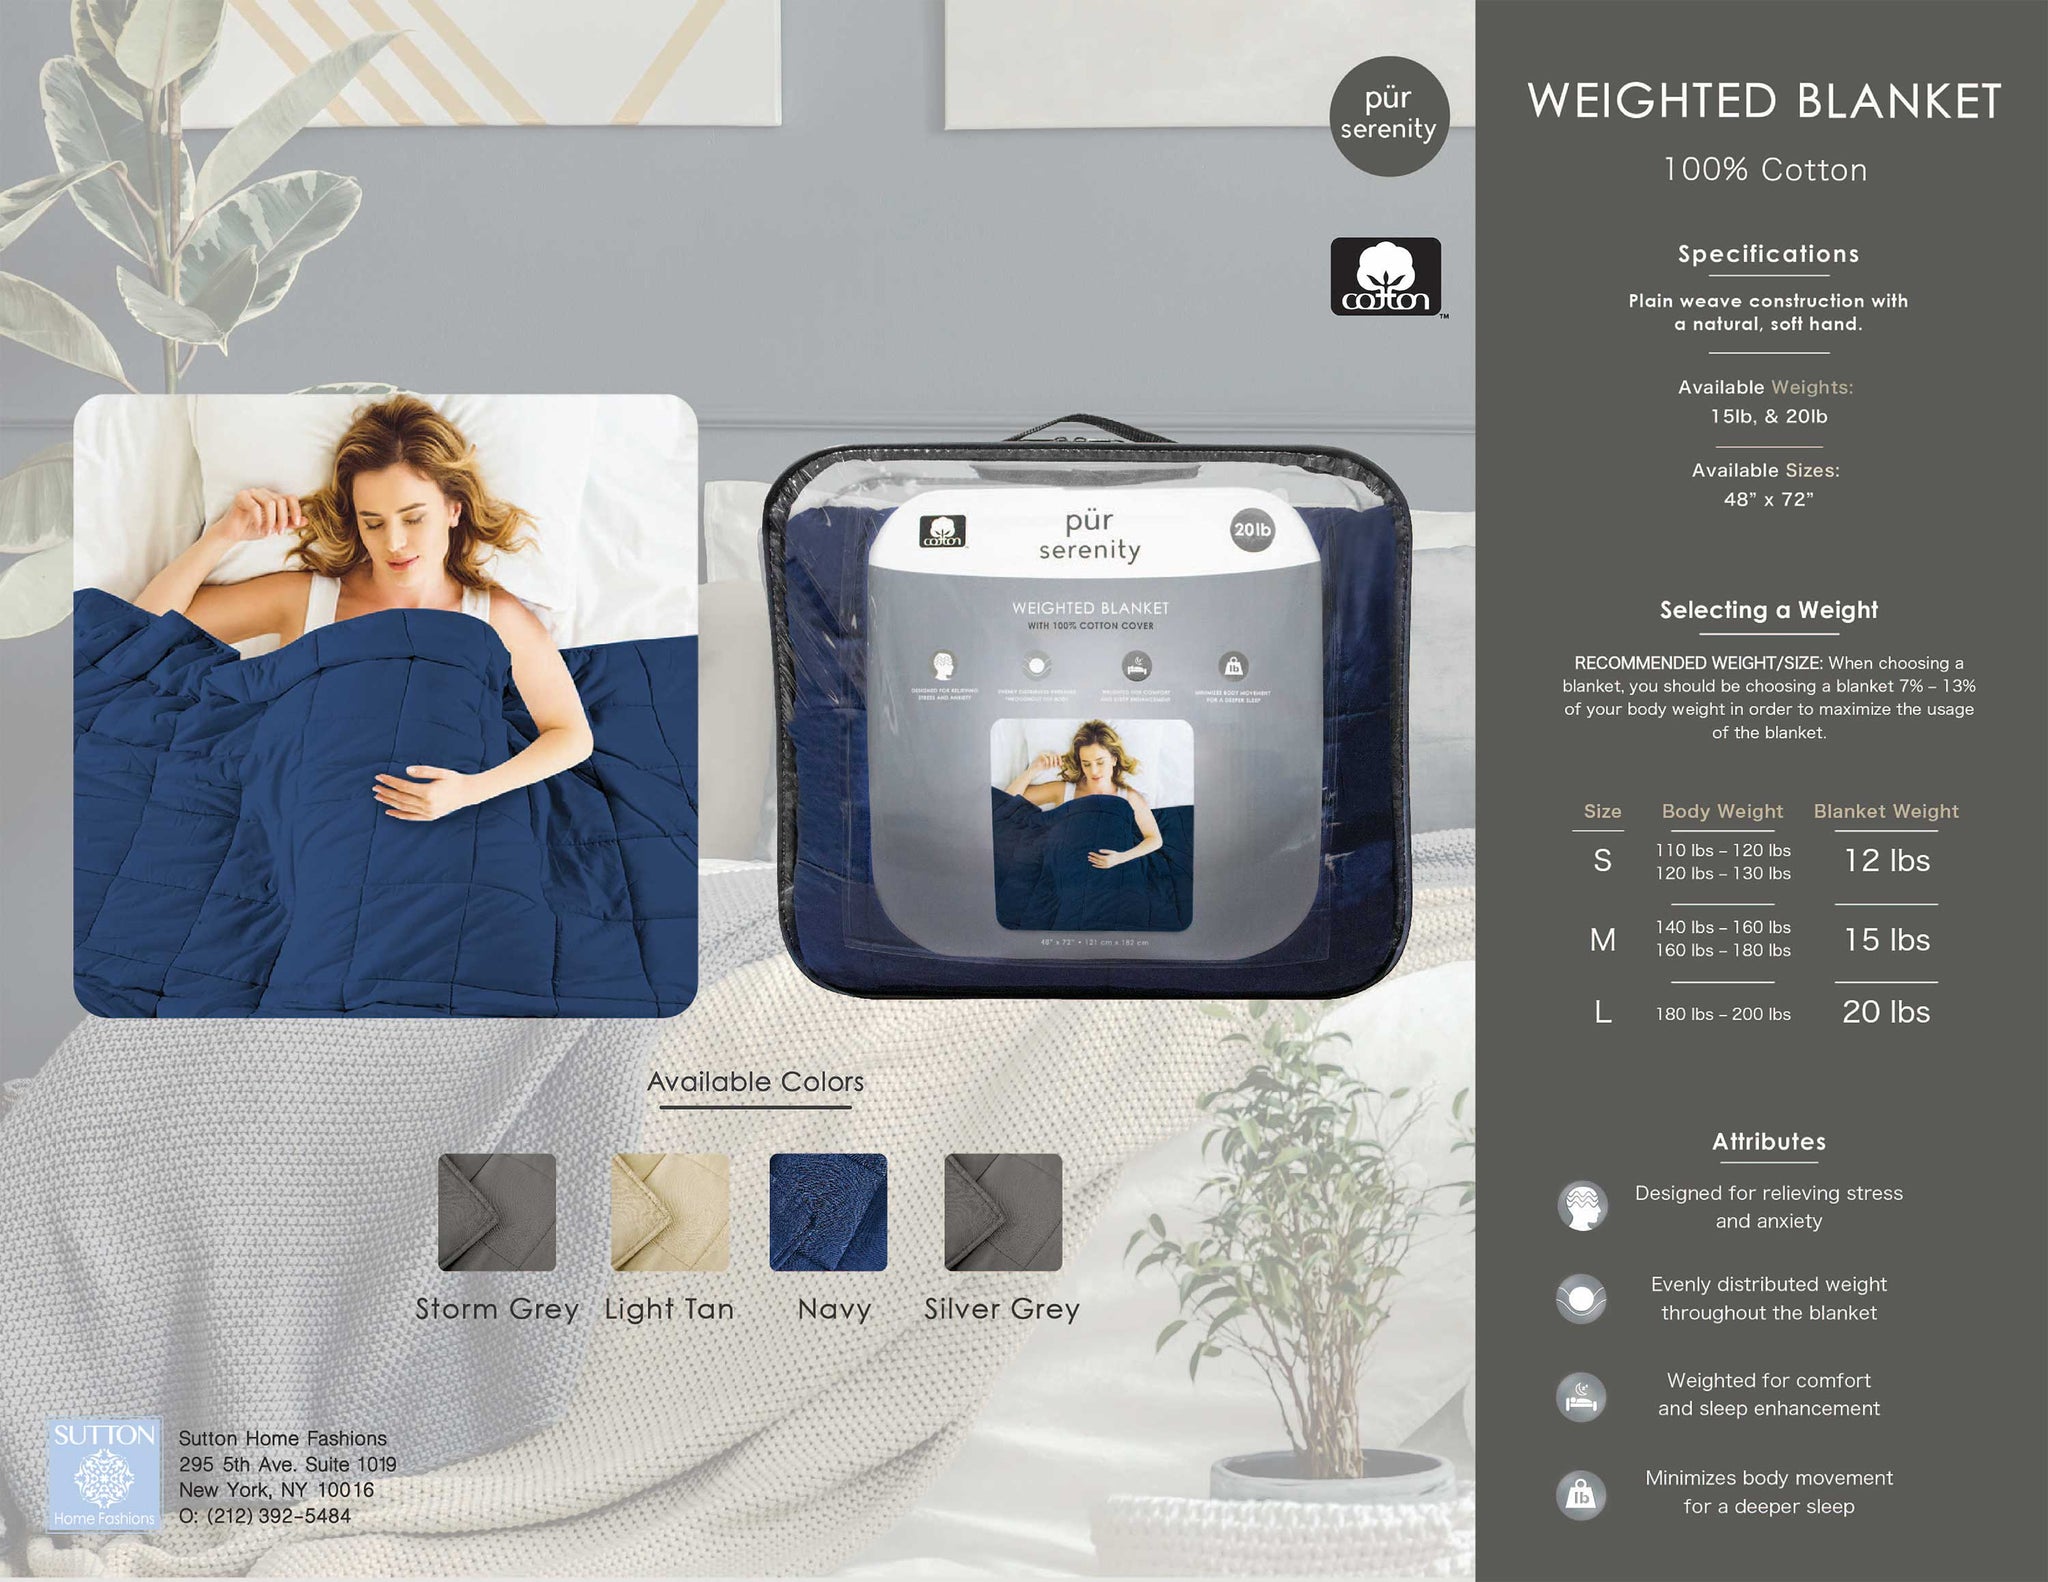 Weighted Blanket Shopping Guide 2019 – Sutton Home Fashions